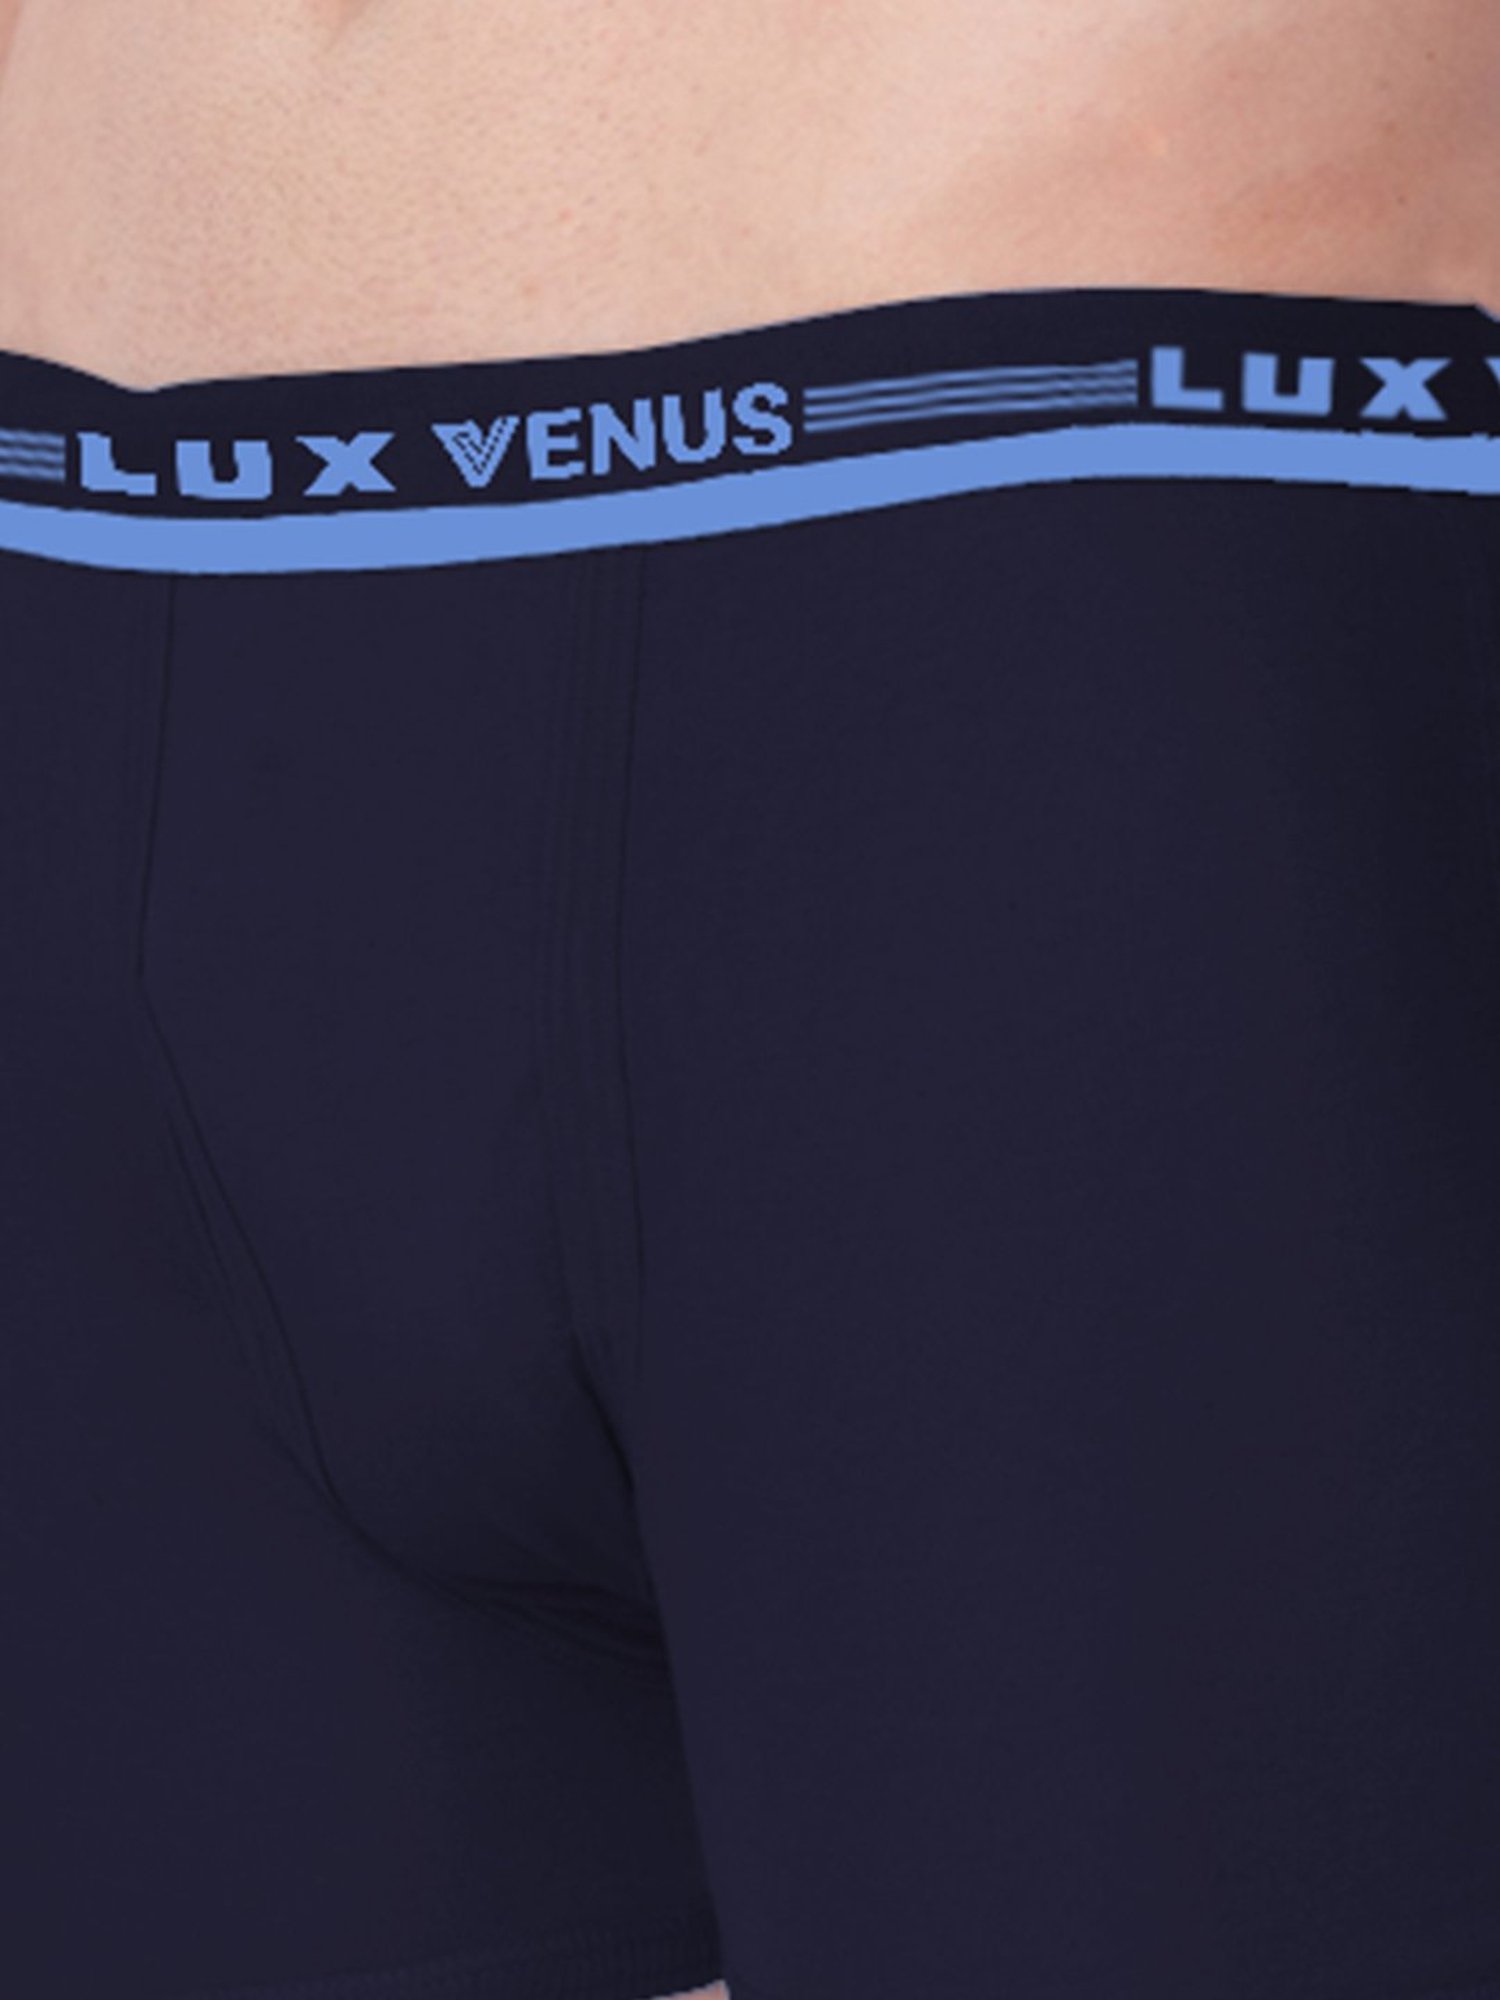 Buy Lux Venus Men's Assorted Solid 100% Cotton Pack of 2 Trunks